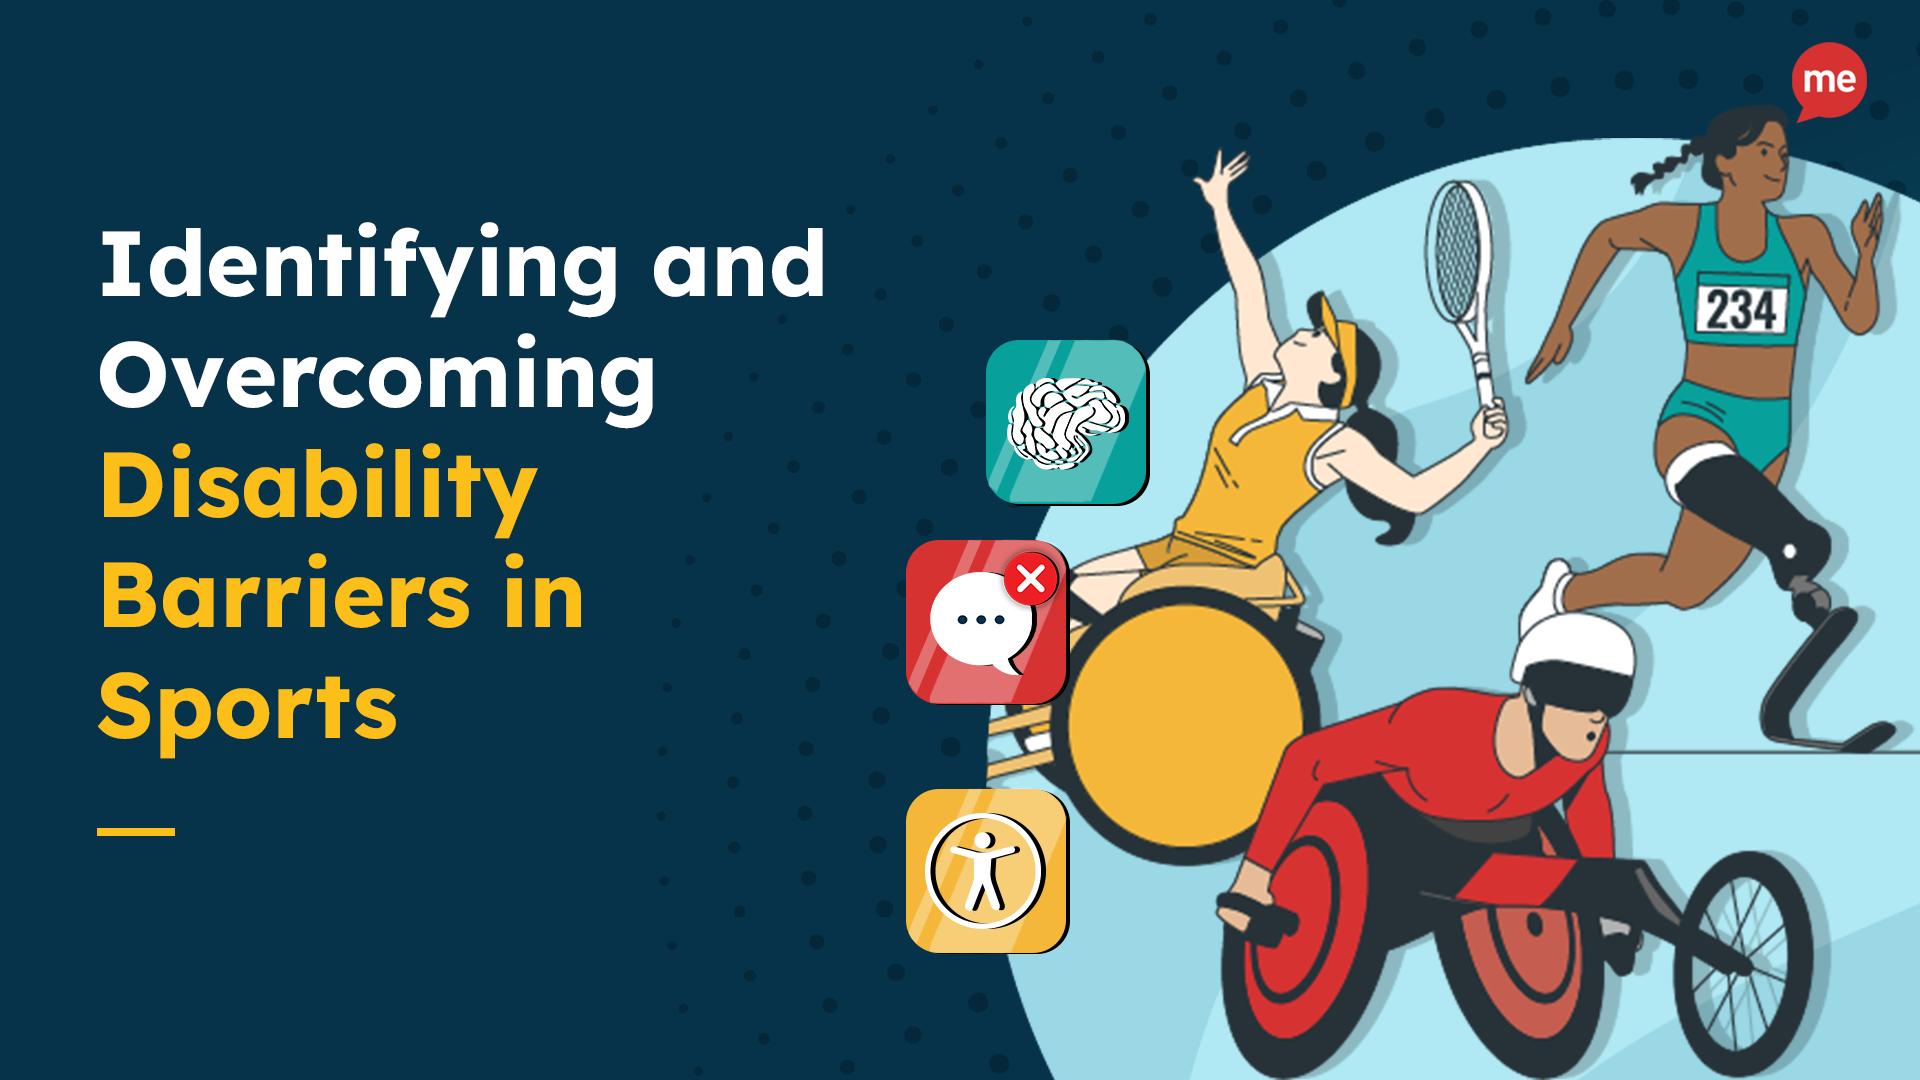 Identifying and Overcoming Disability Barriers in Sports